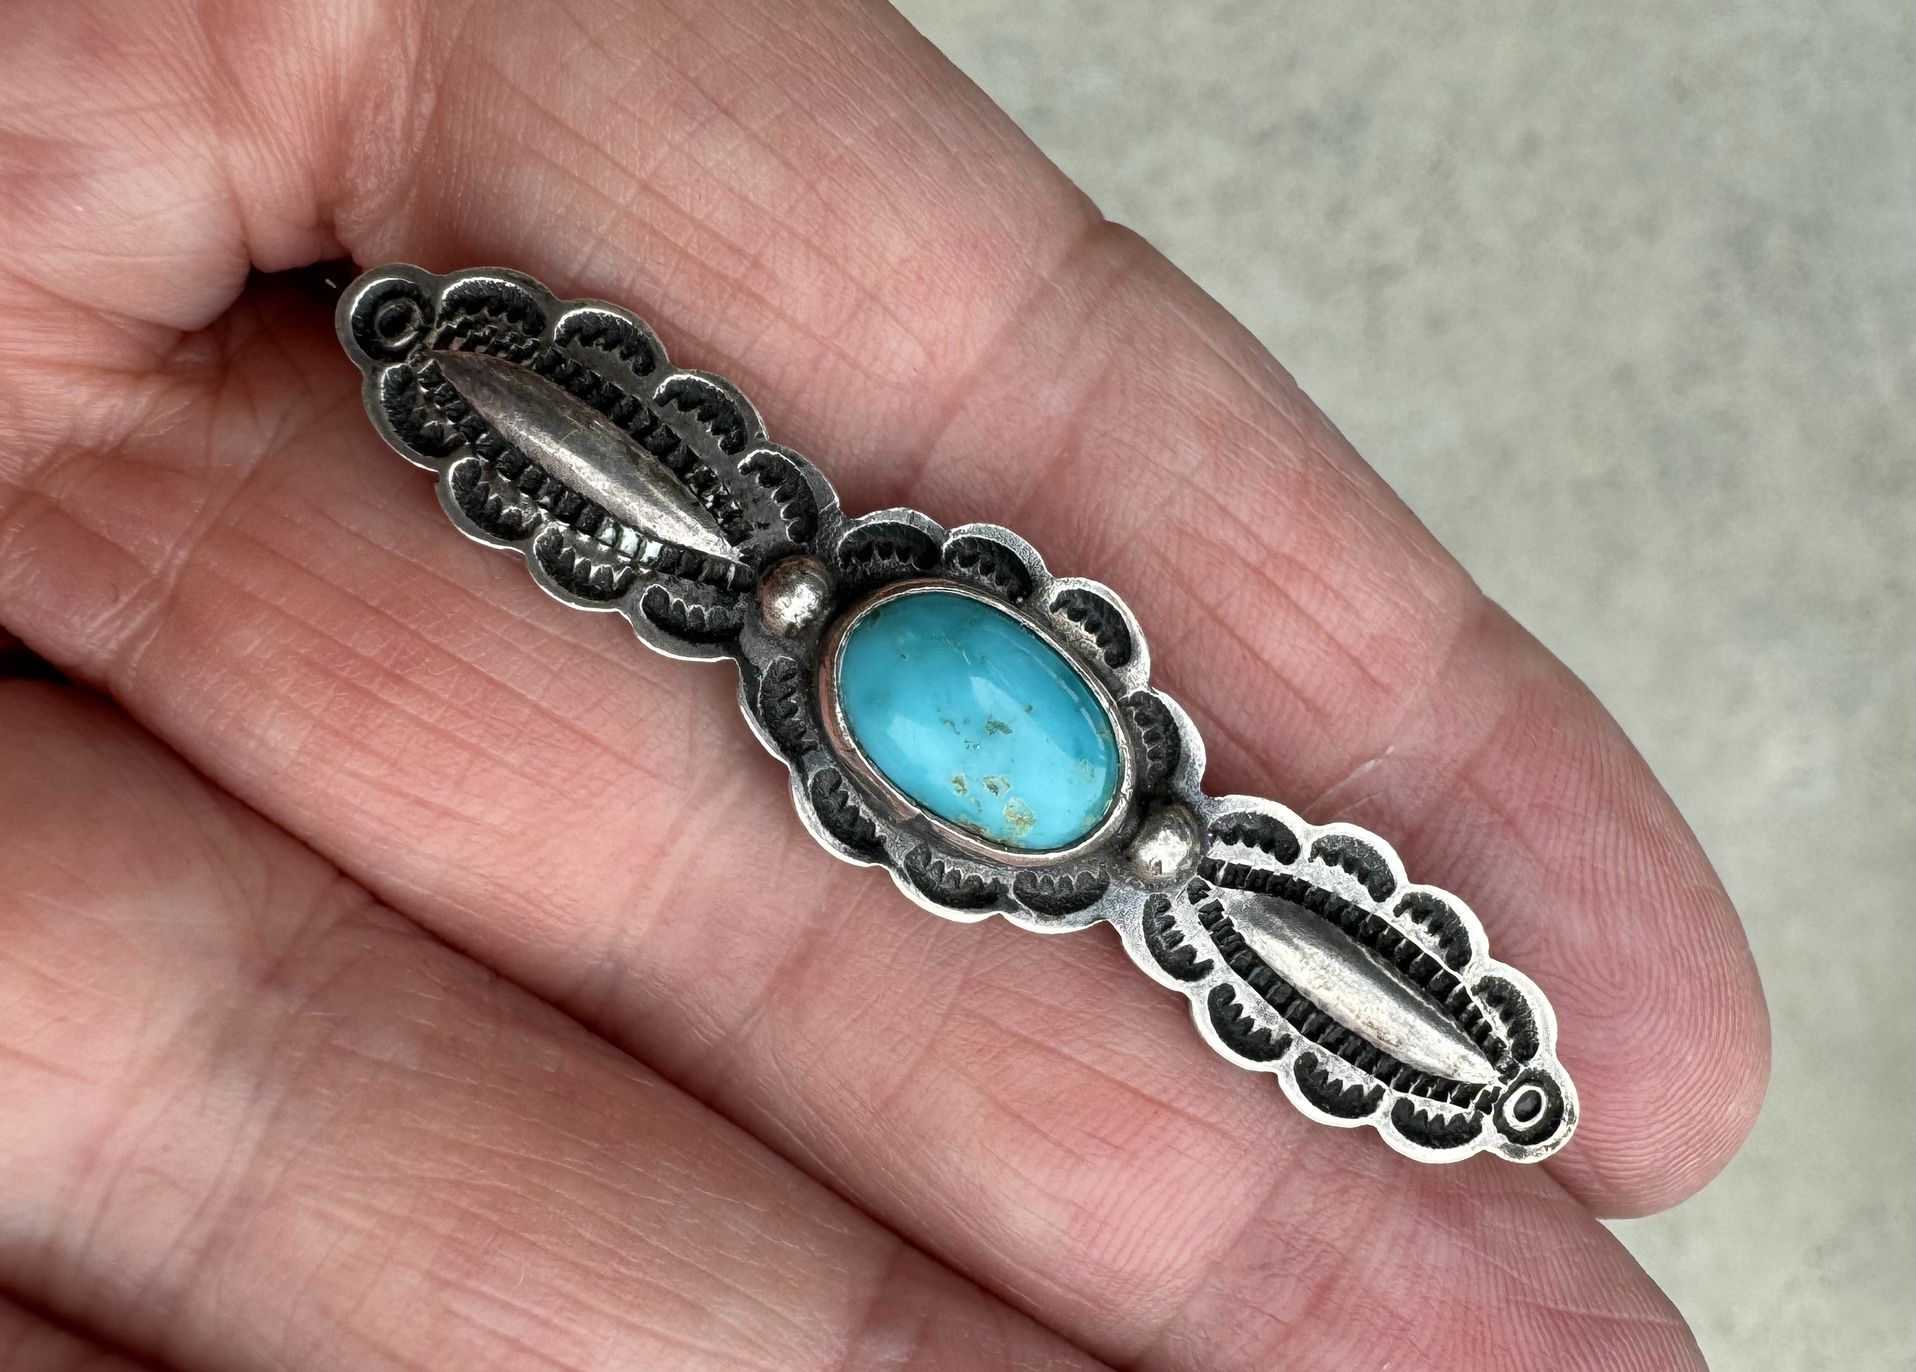 Vintage Sterling Silver & Turquoise Brooch